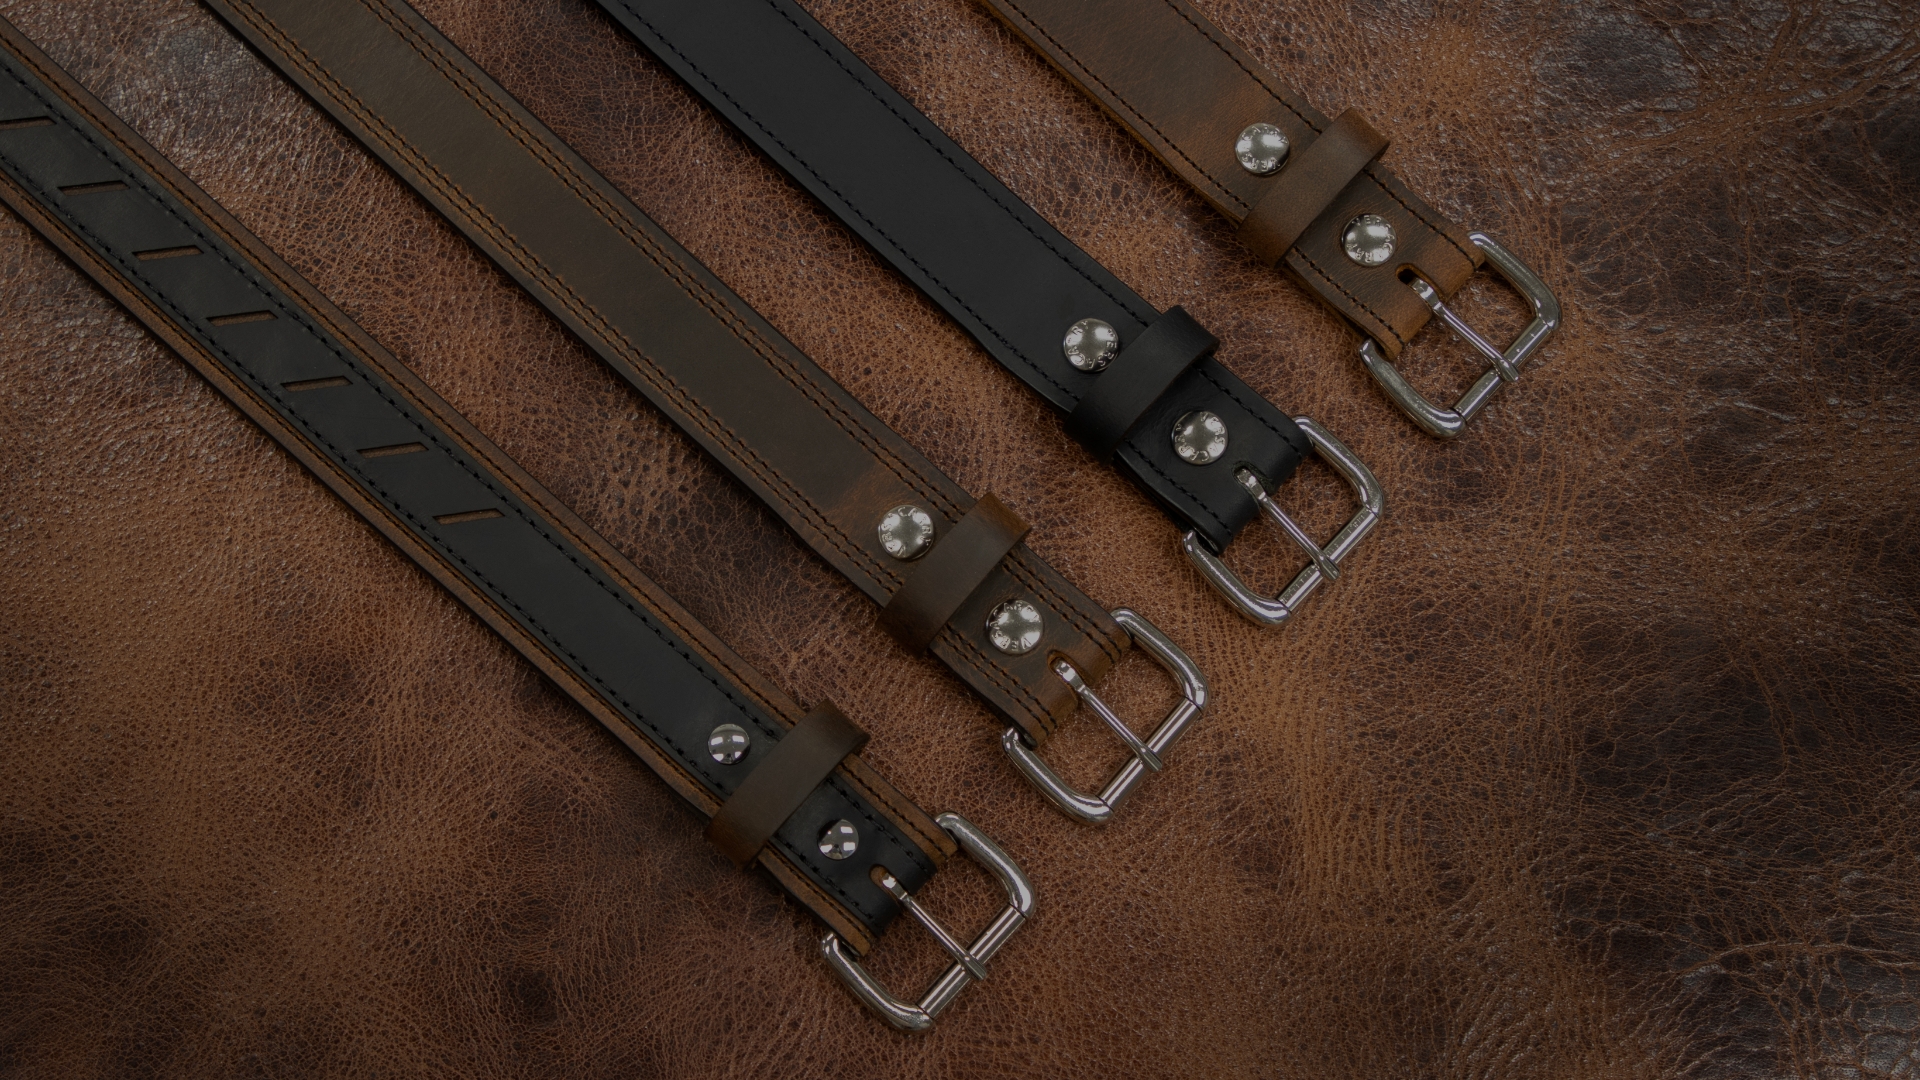 Graber Harness Black Leather Tool Belt Suspenders W/ Belt Loops.x Stainless Snap  Hooks.2 Shoulder Pads .made in USA 